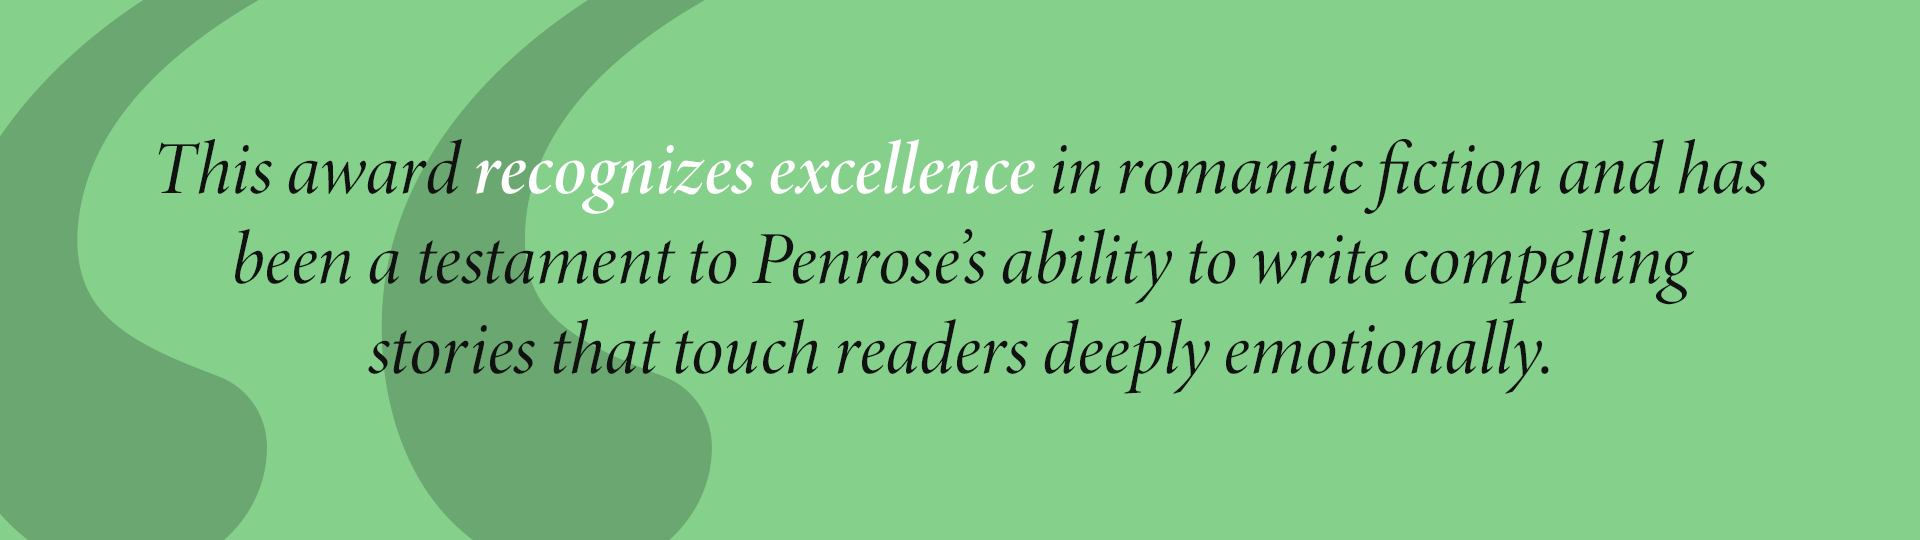 This award recognizes excellence in romantic fiction and has been a testament to Penrose’s ability to write compelling
stories that touch readers deeply emotionally.